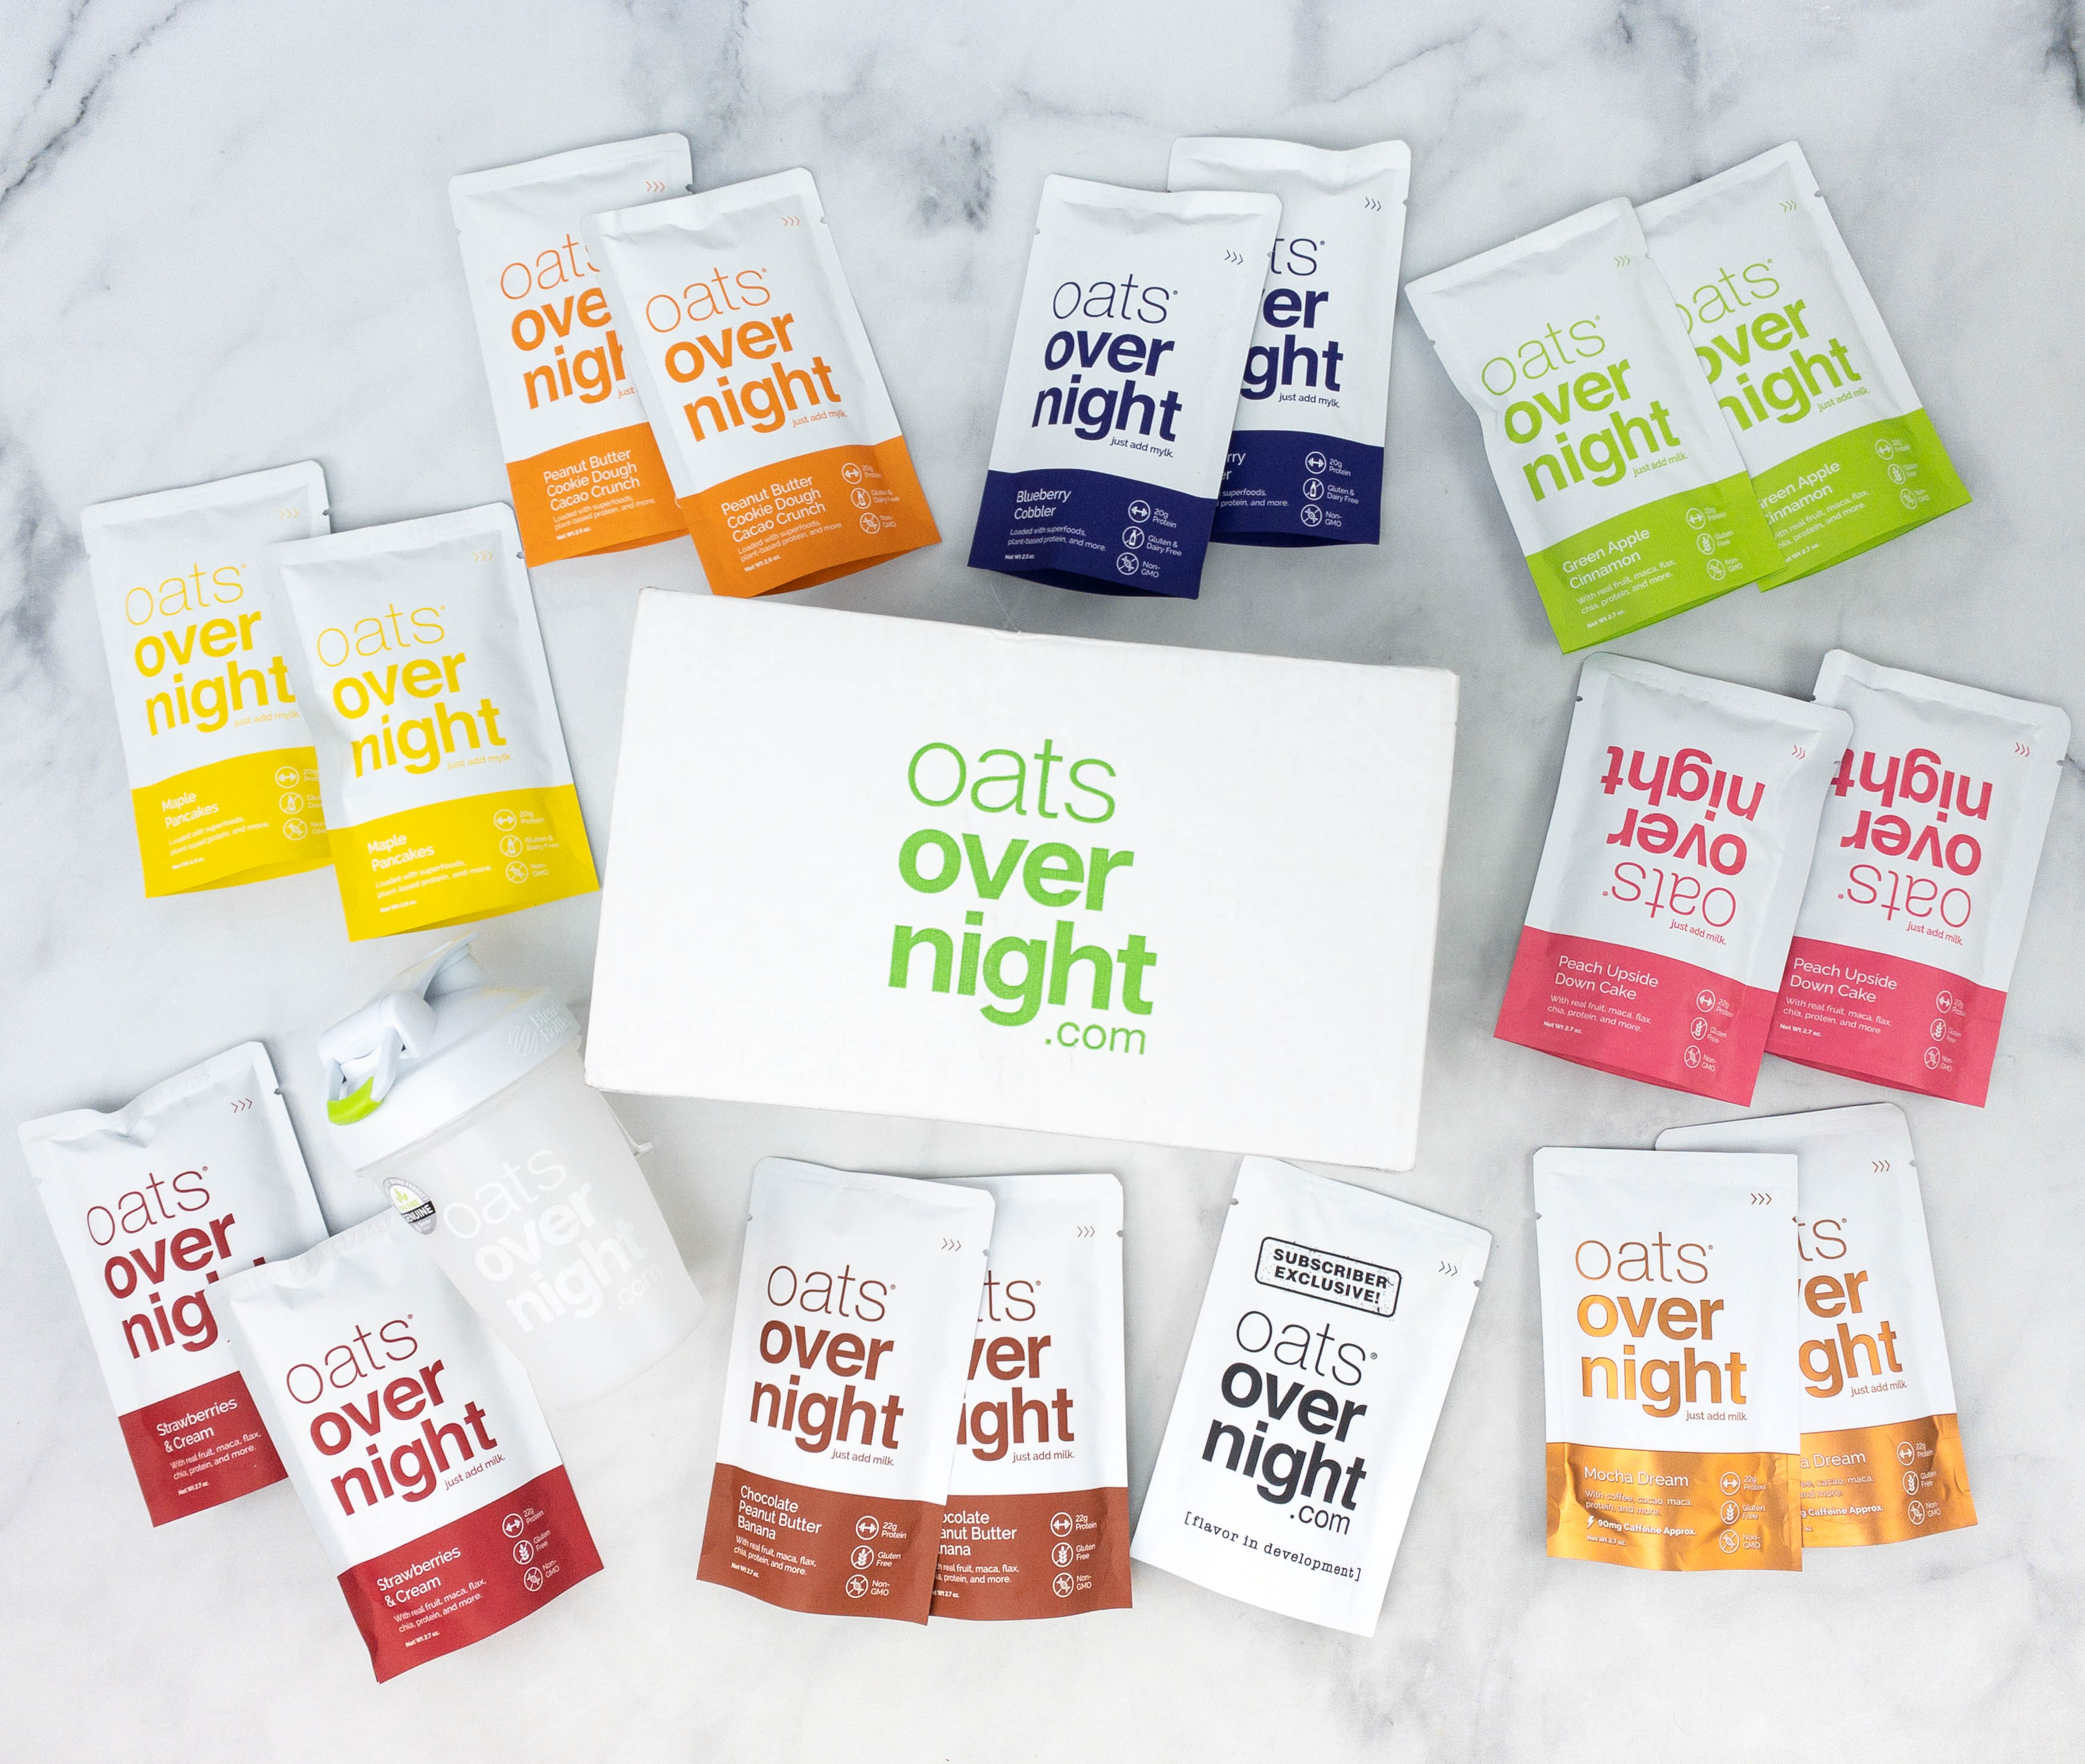 https://hellosubscription.com/wp-content/uploads/2021/05/oats-overnight-review-3.jpg?quality=90&strip=all